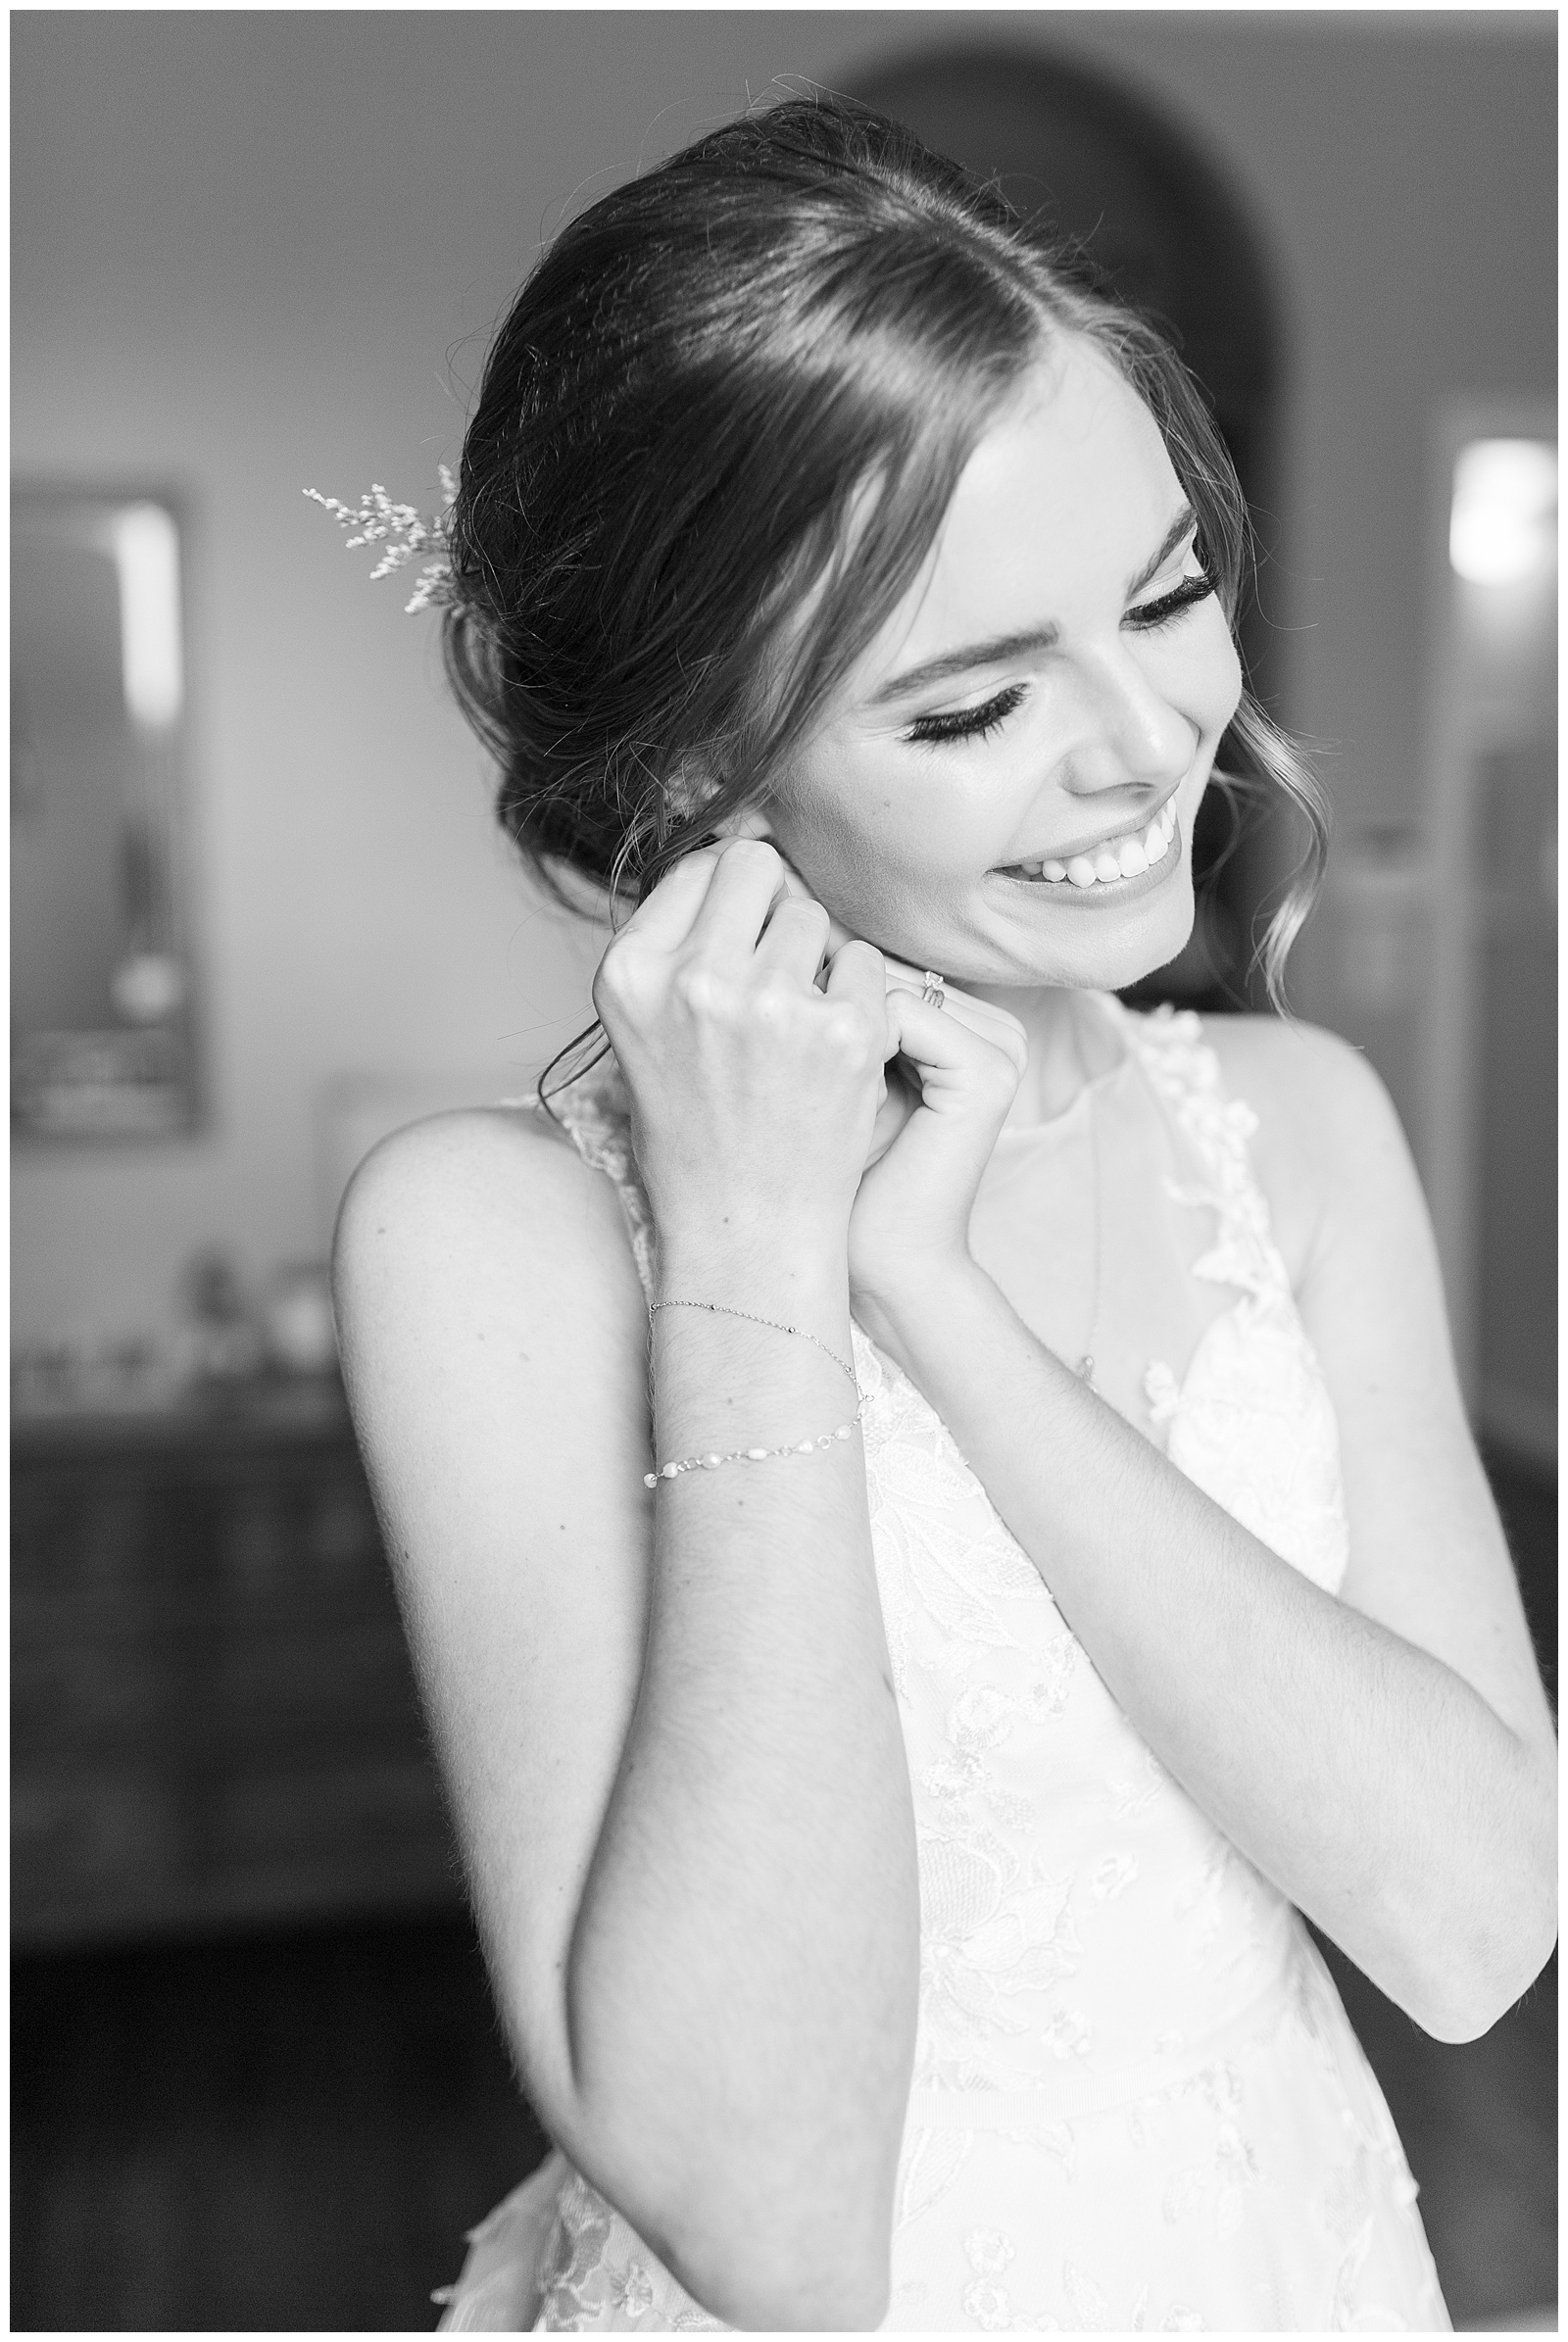 close up black and white image bride smiling putting earrings in on wedding day getting ready photos by frenso wedding photographer megan helm photography